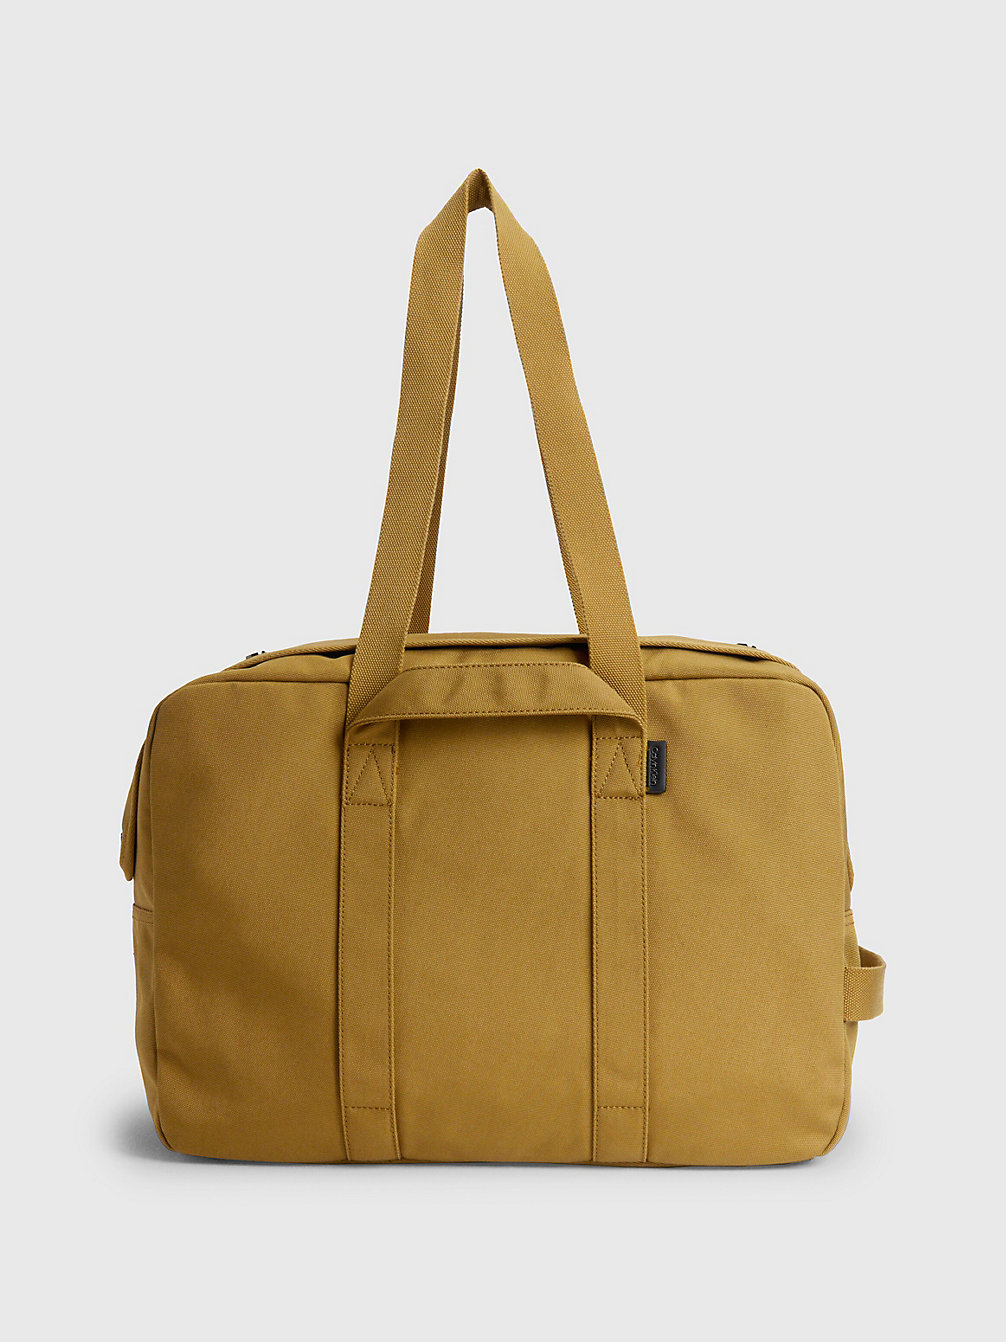 DULL GOLD Sac Week-End Recyclé undefined hommes Calvin Klein